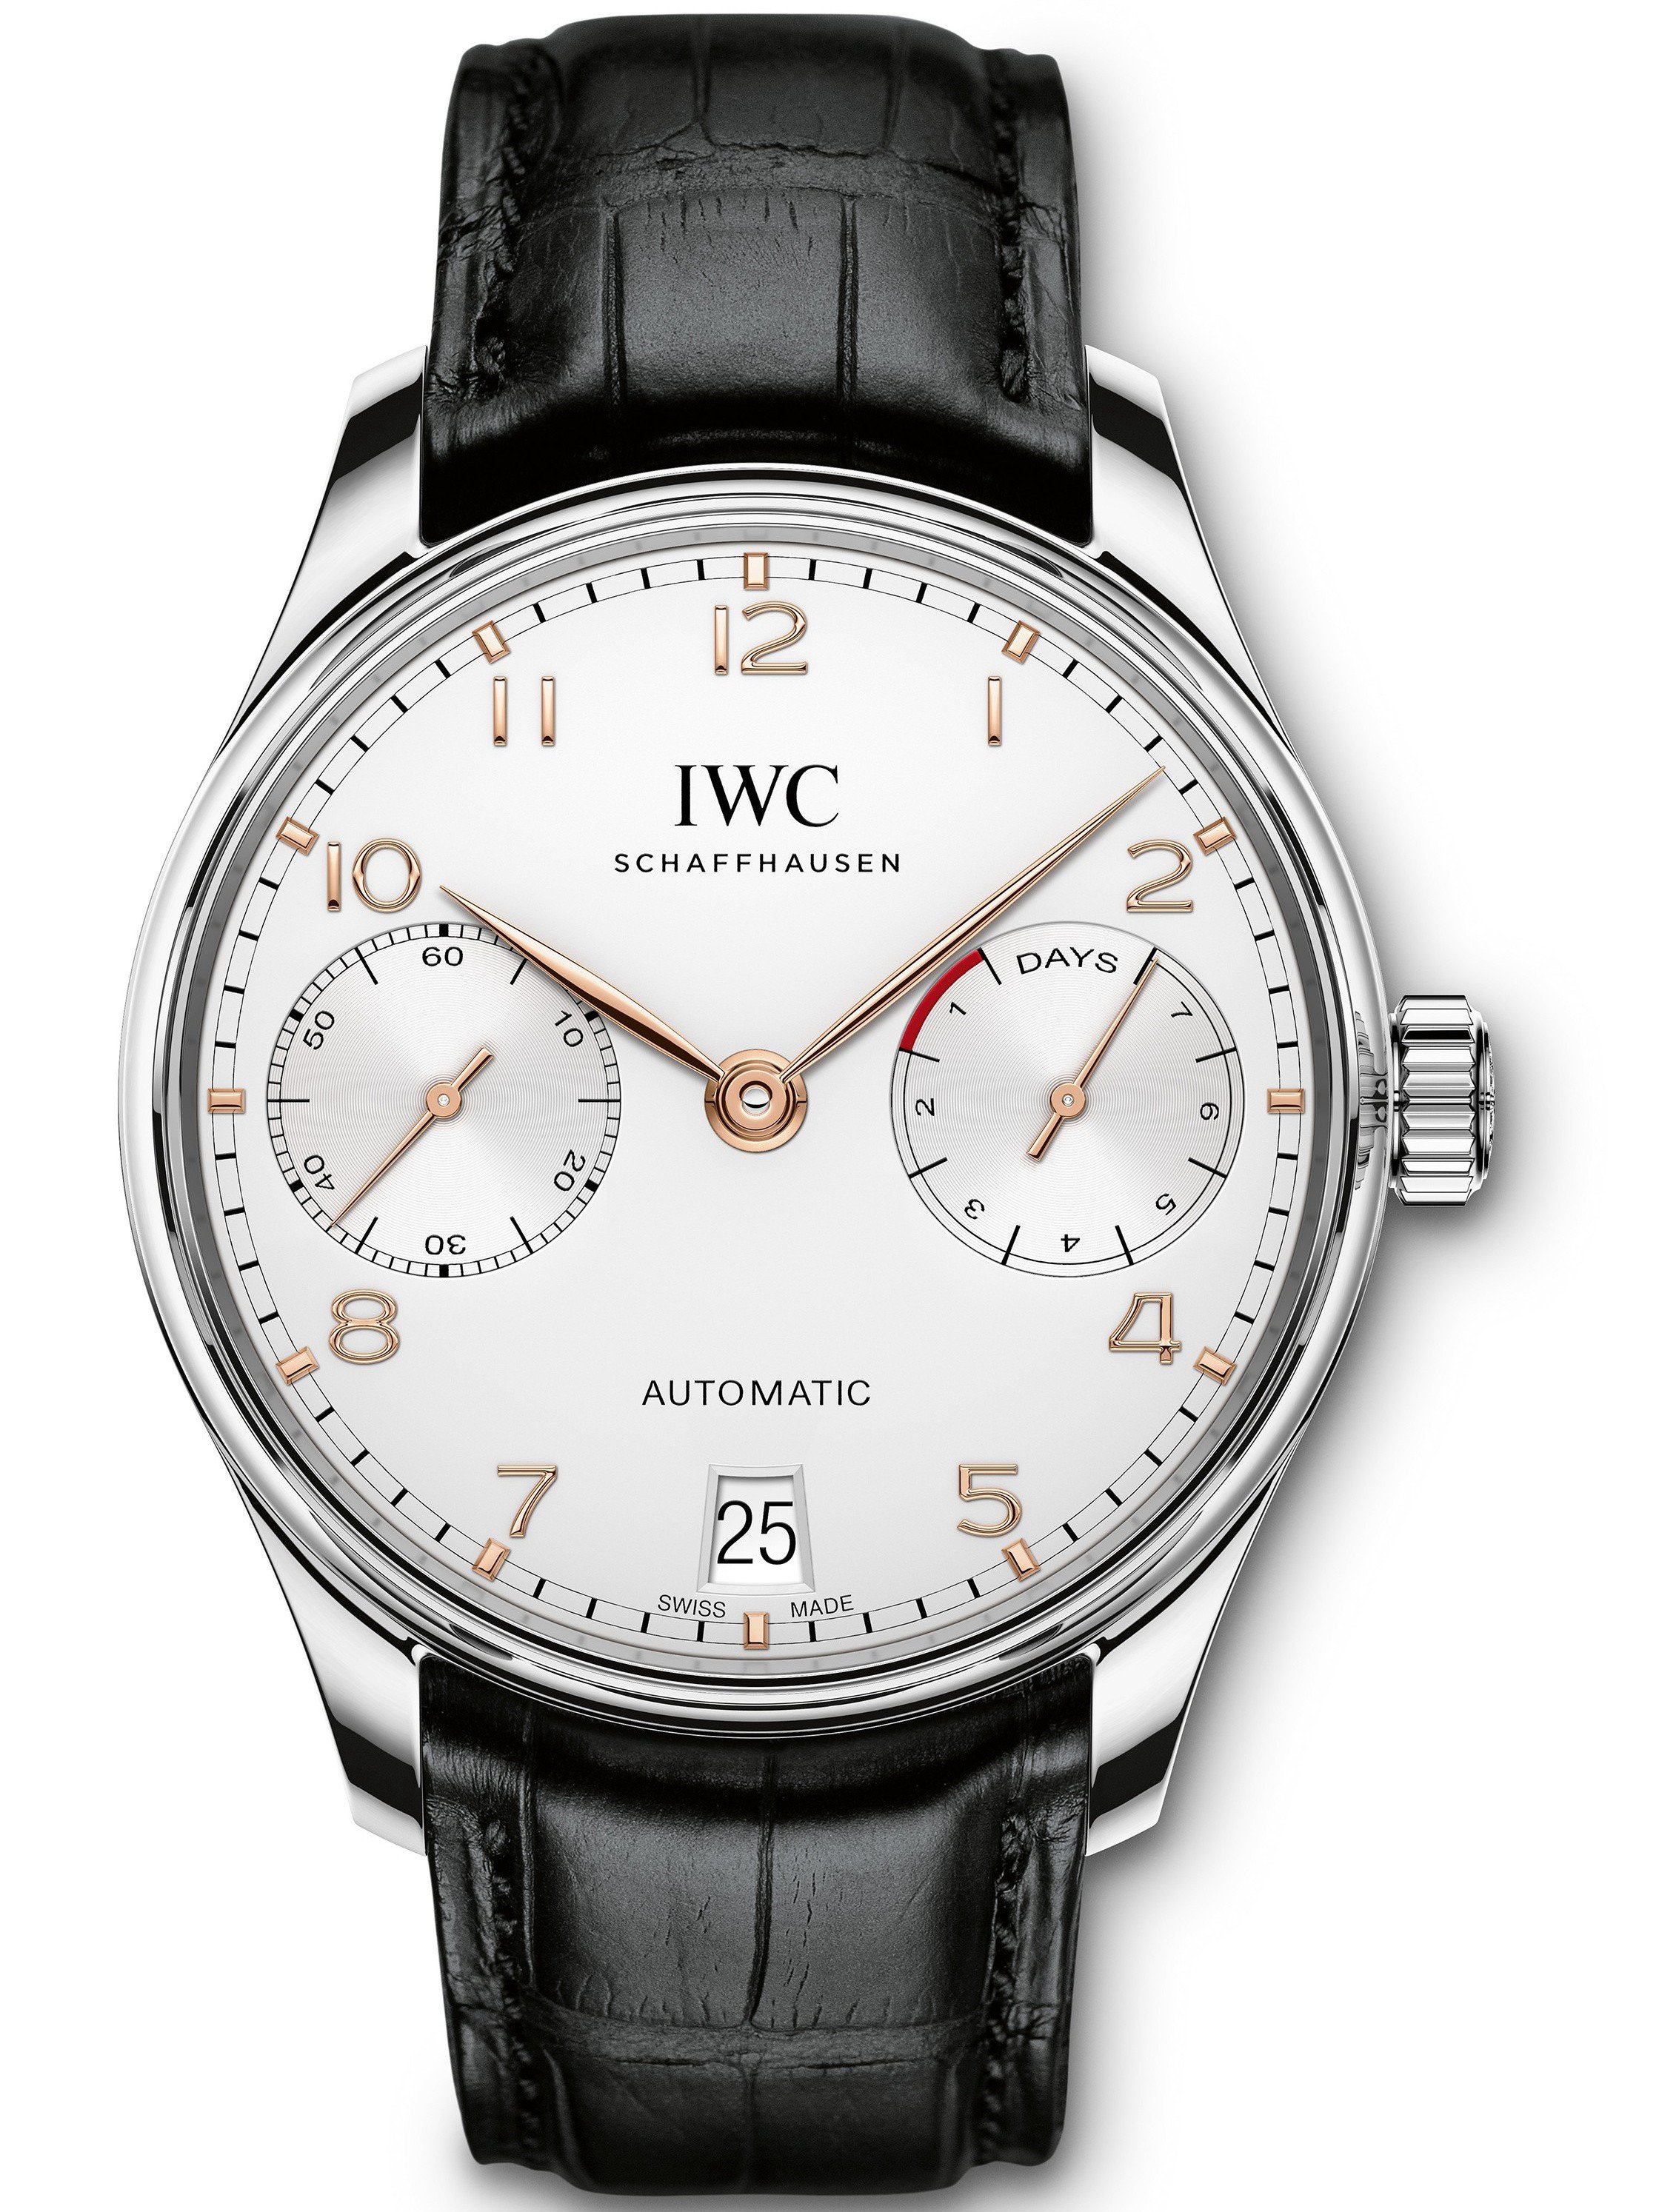 AAA Replica IWC Portugieser Automatic 7 Day Power Reserve Mens Watch IW500704